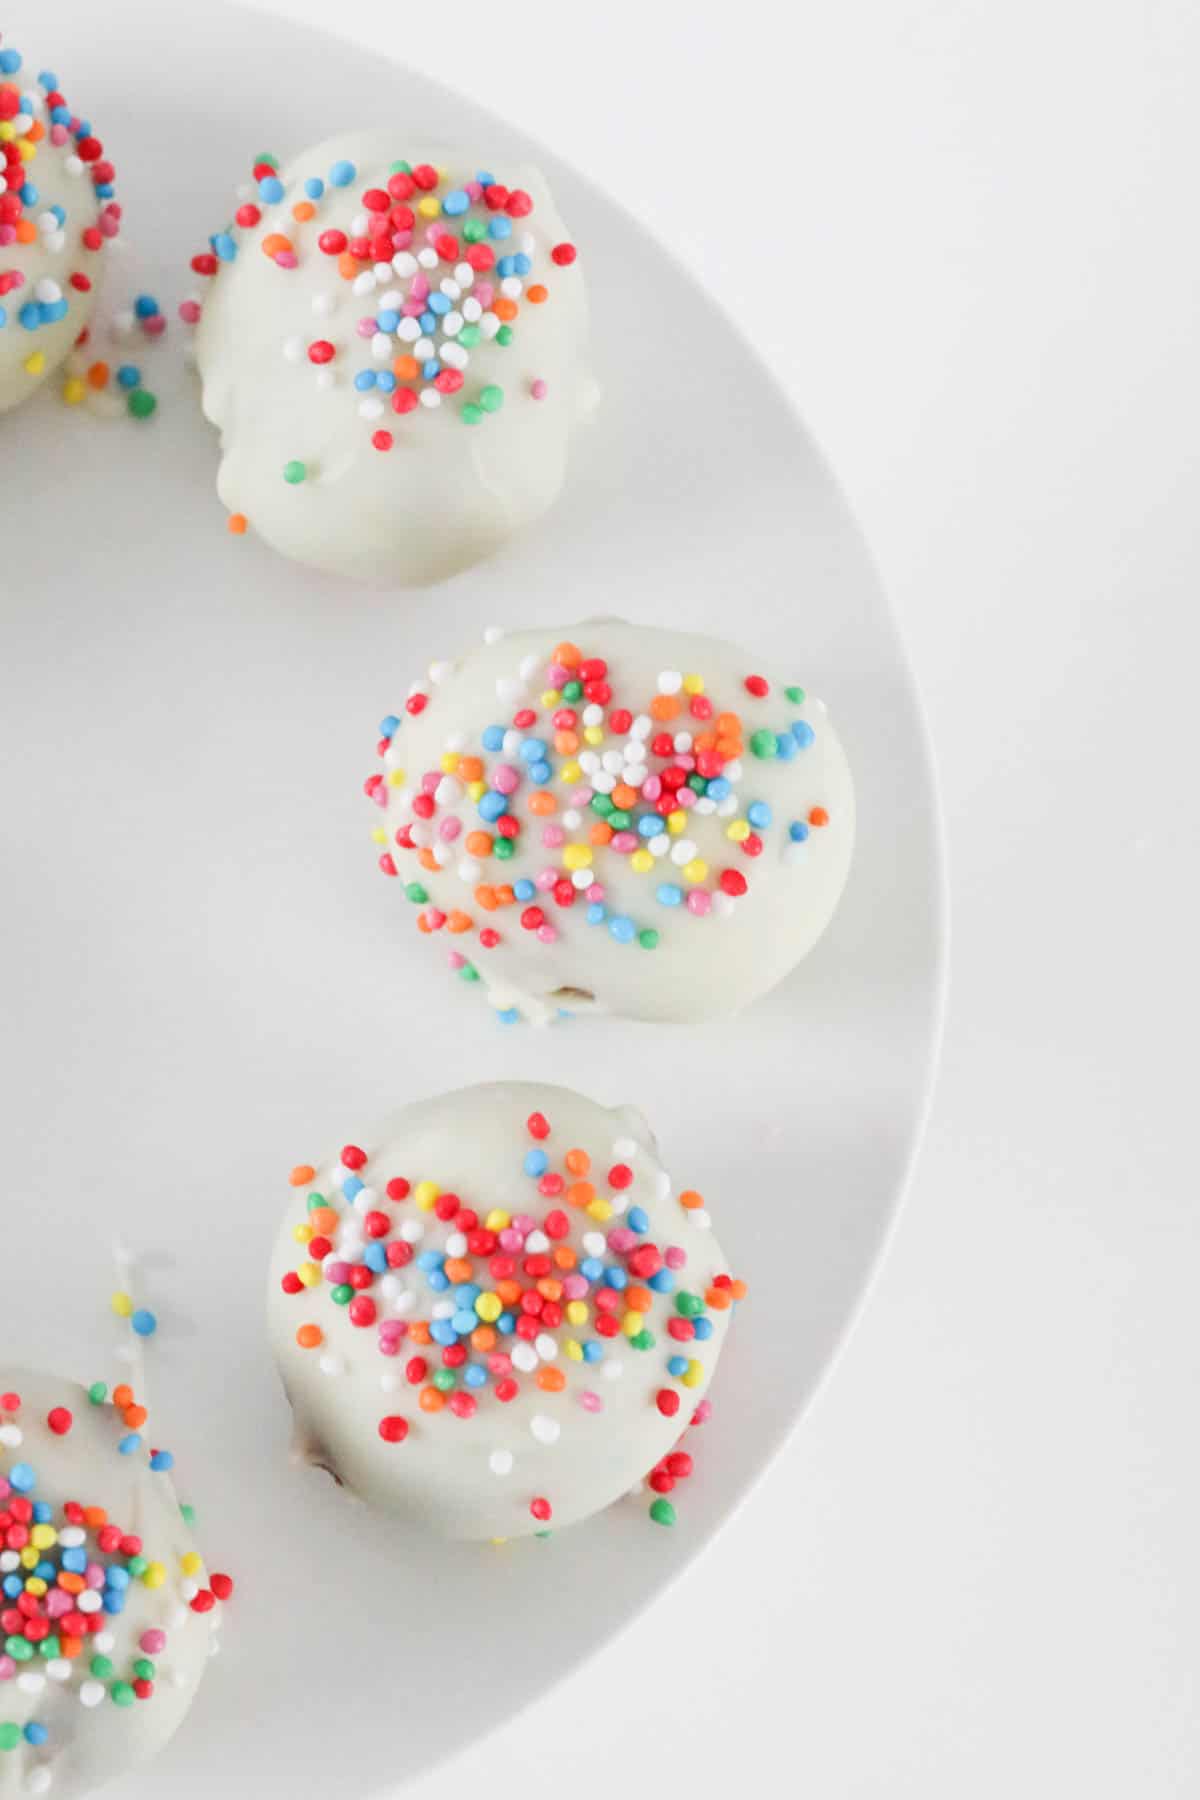 An overhead shot of white chocolate truffles with sprinkles.